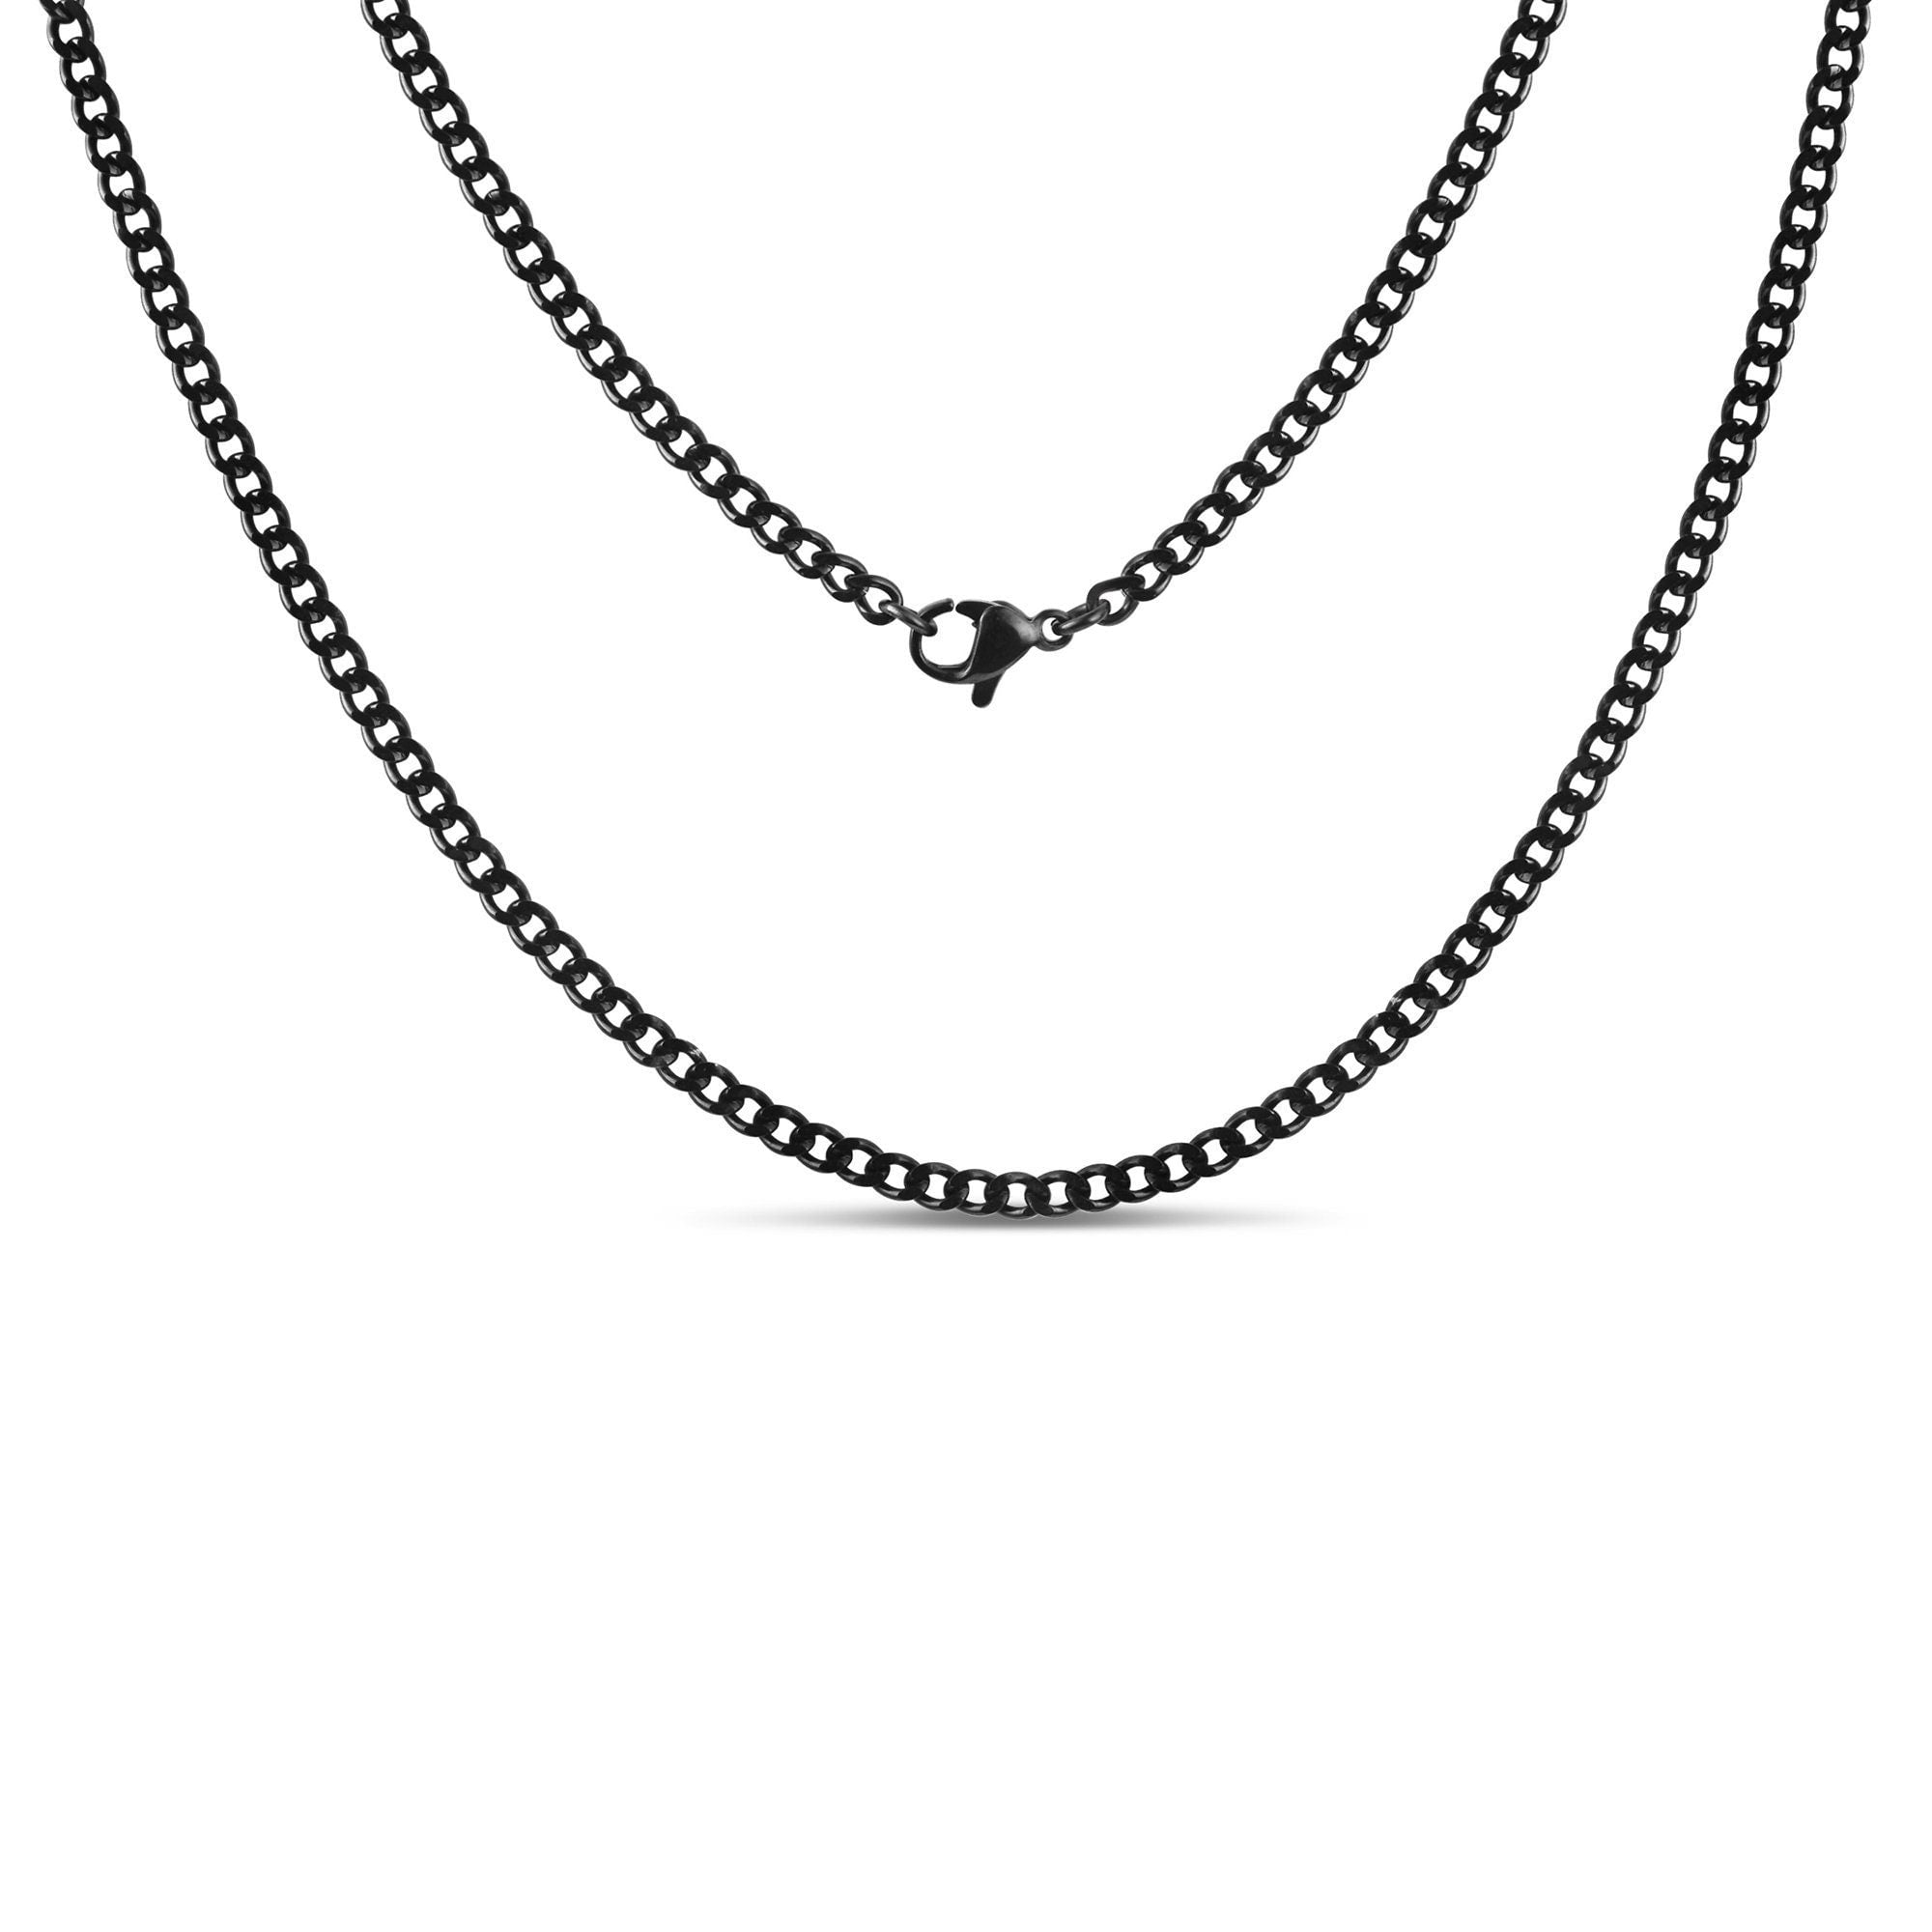 Men's Black Stainless Steel Curb Link Chain Necklace